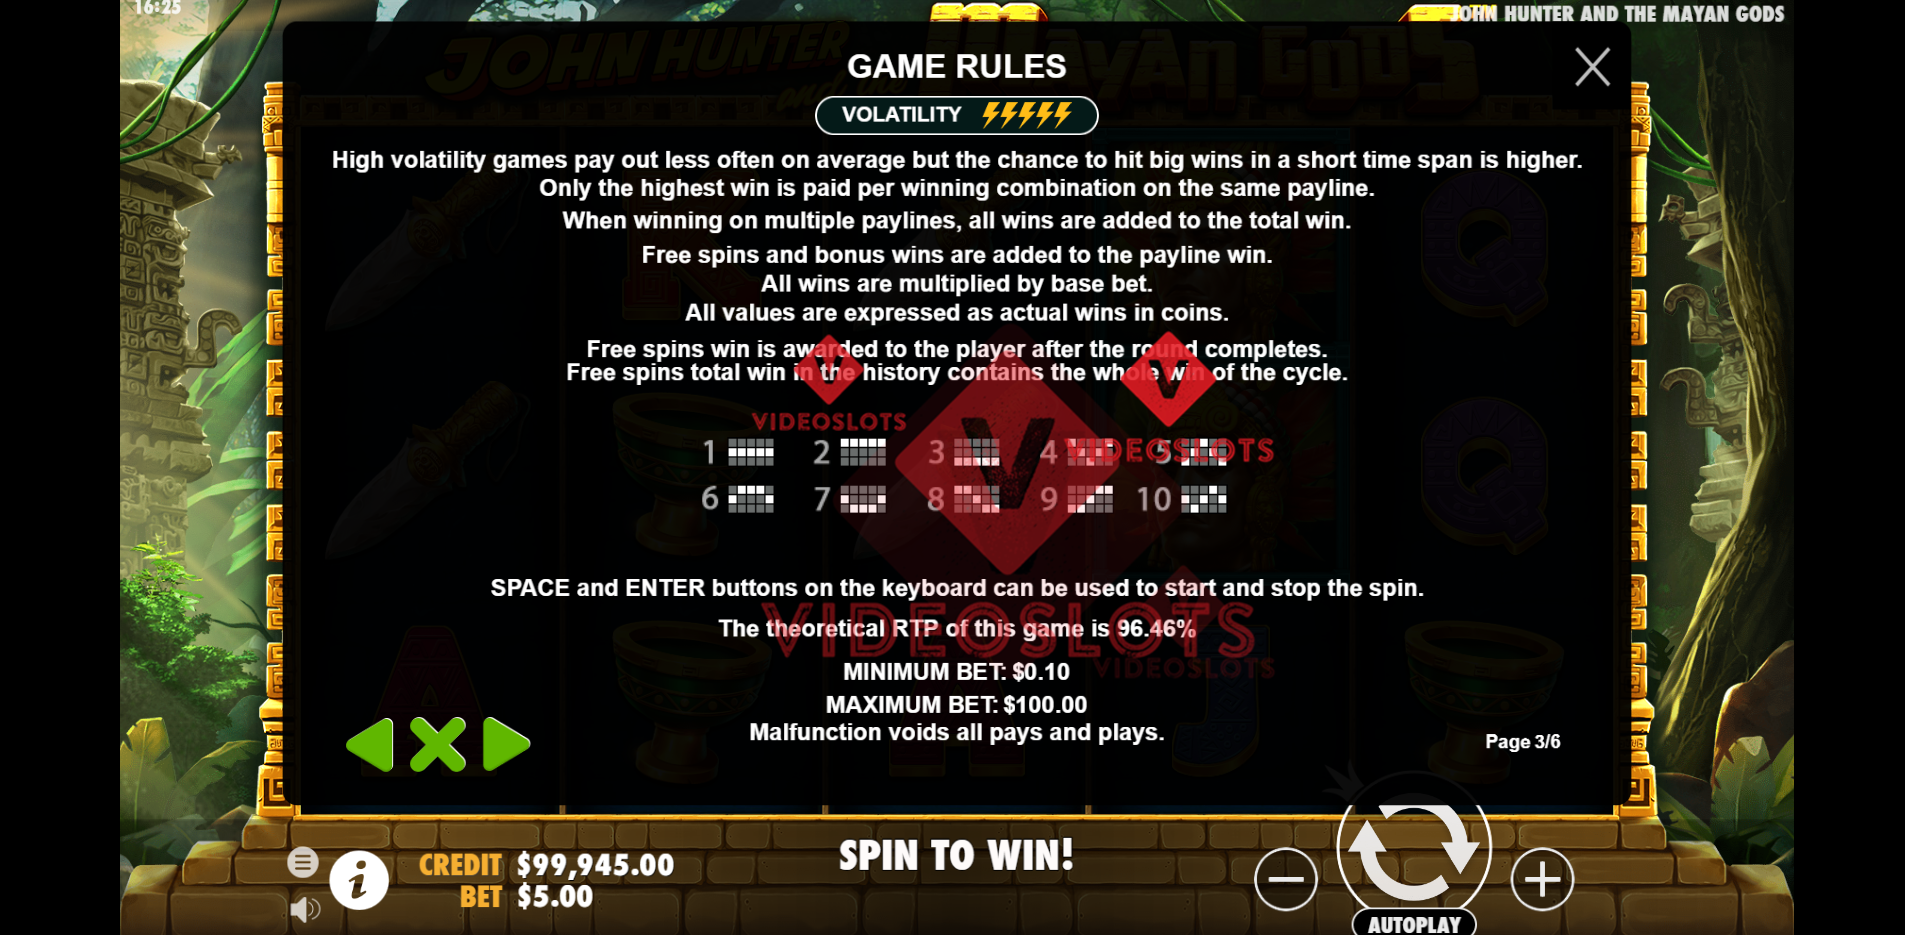 Game Rules for John Hunter and The Mayan Gods slot by Pragmatic Play